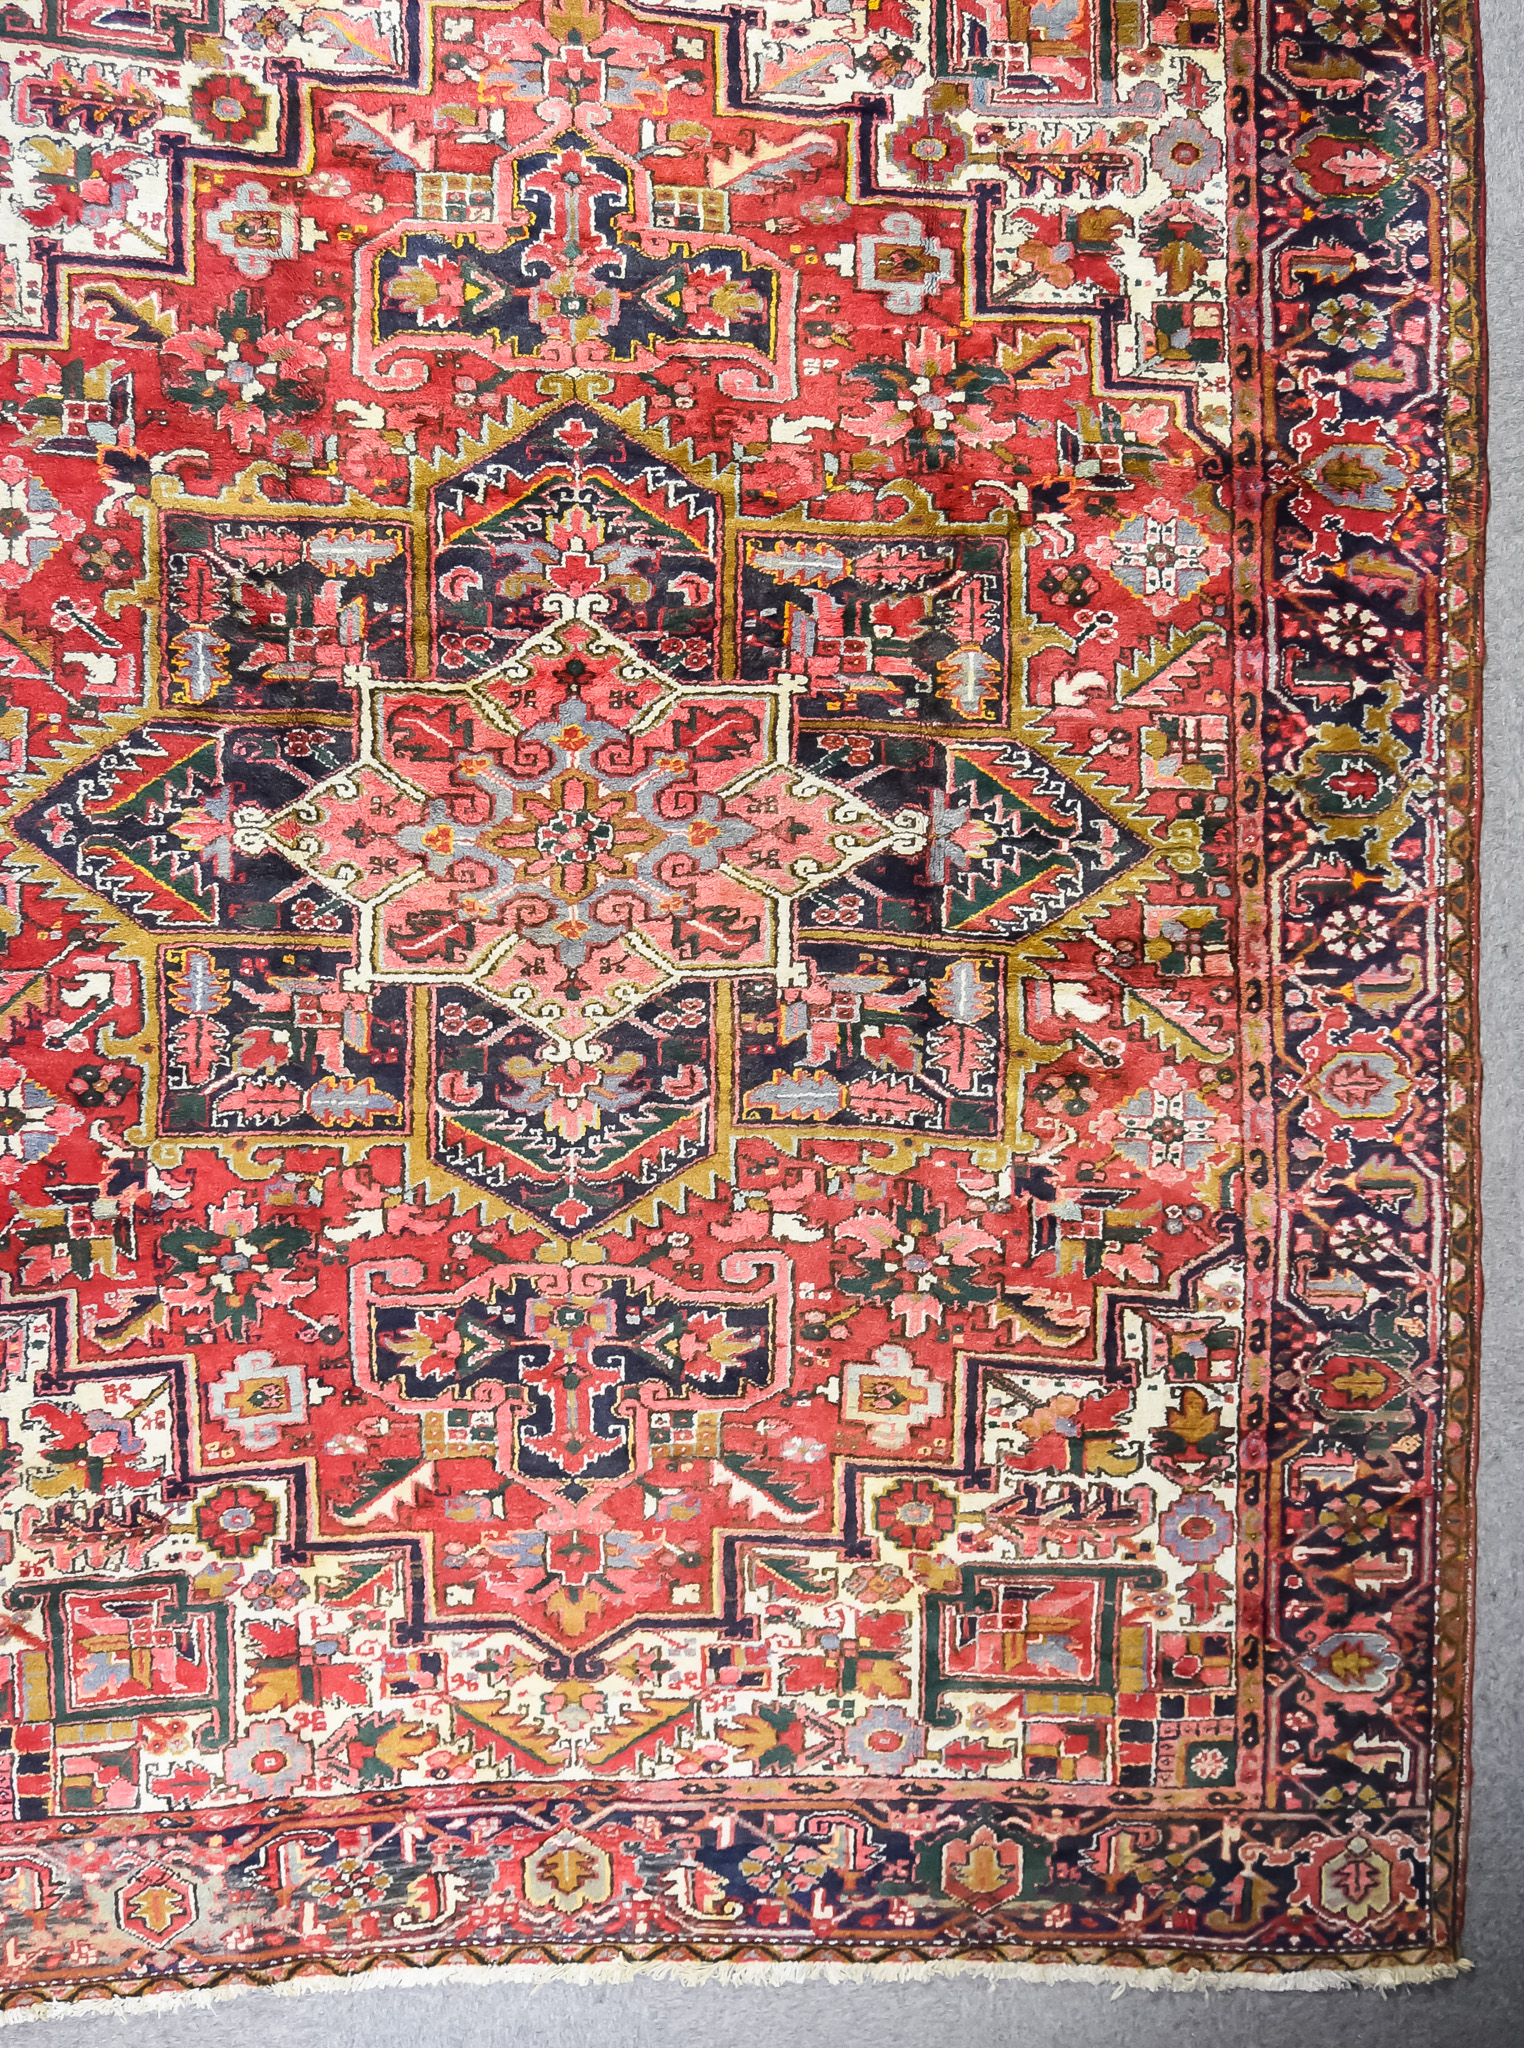 An Antique Heriz Carpet, woven in colours of ivory,navy blue and wine, with a bold central cross